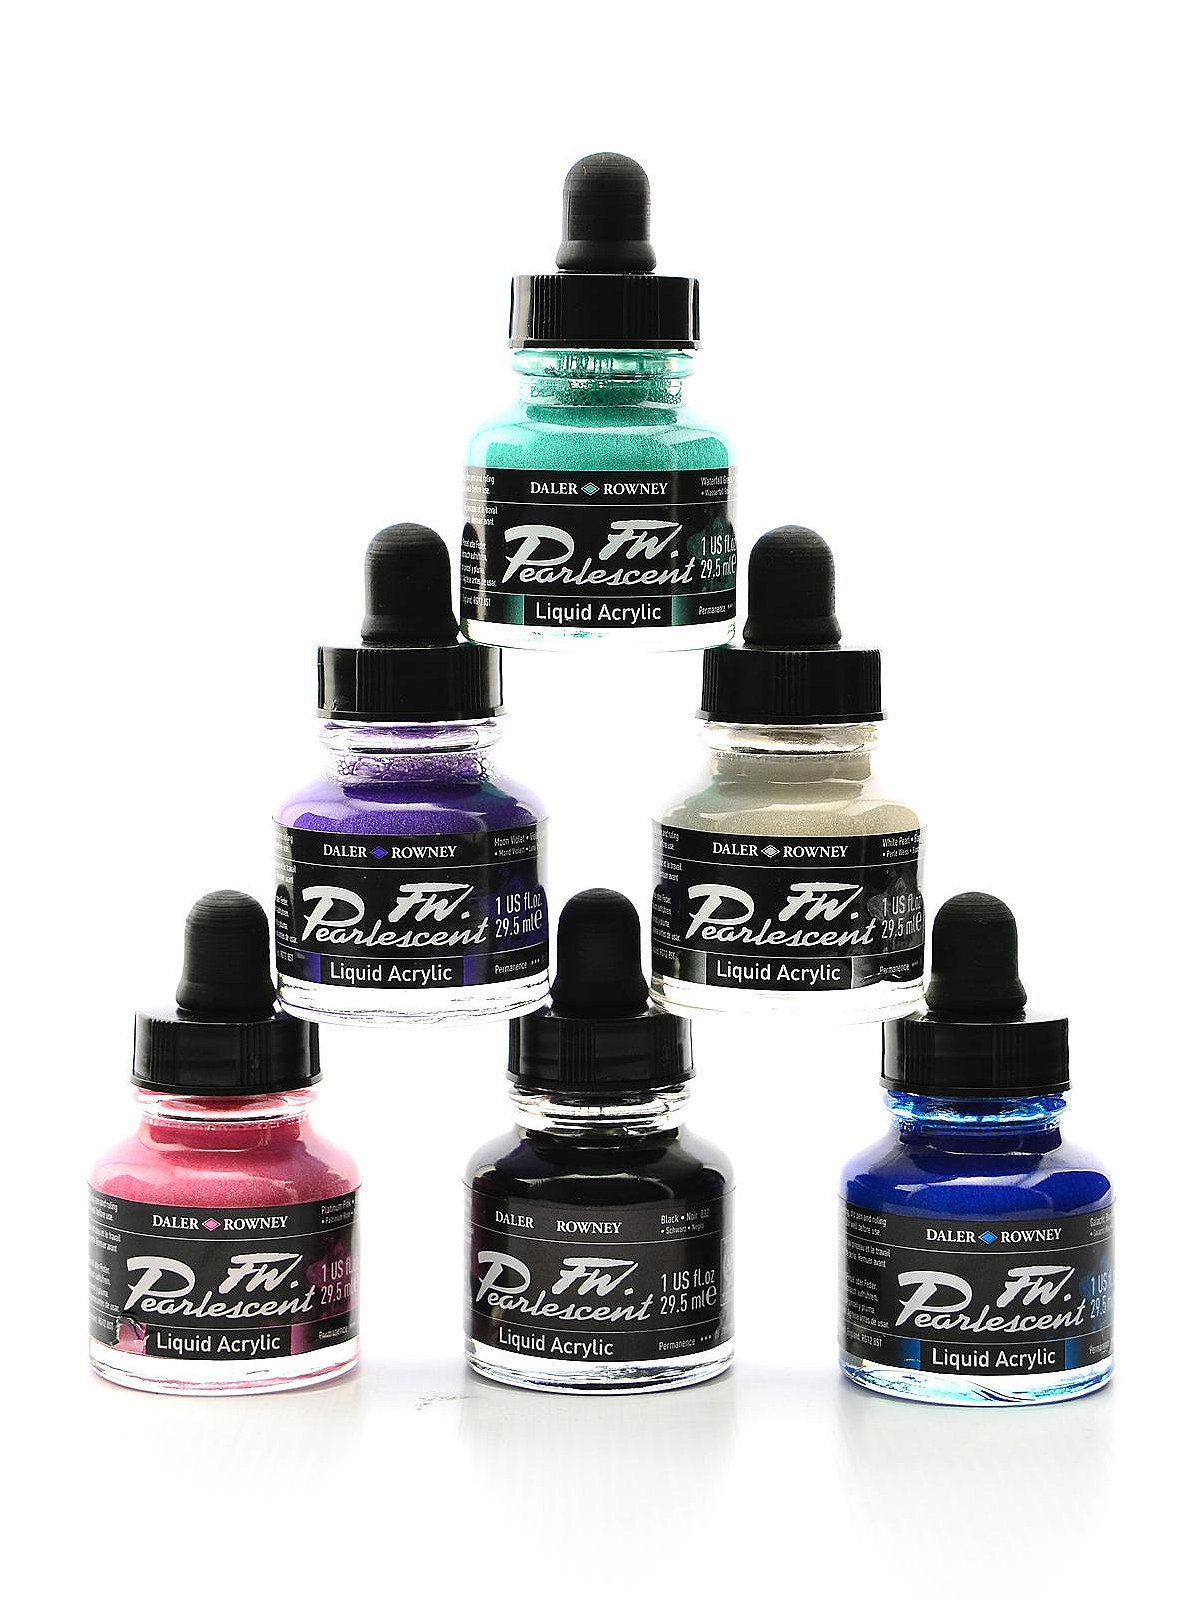 Daler-Rowney FW Liquid Acrylic Artists' Inks and Sets